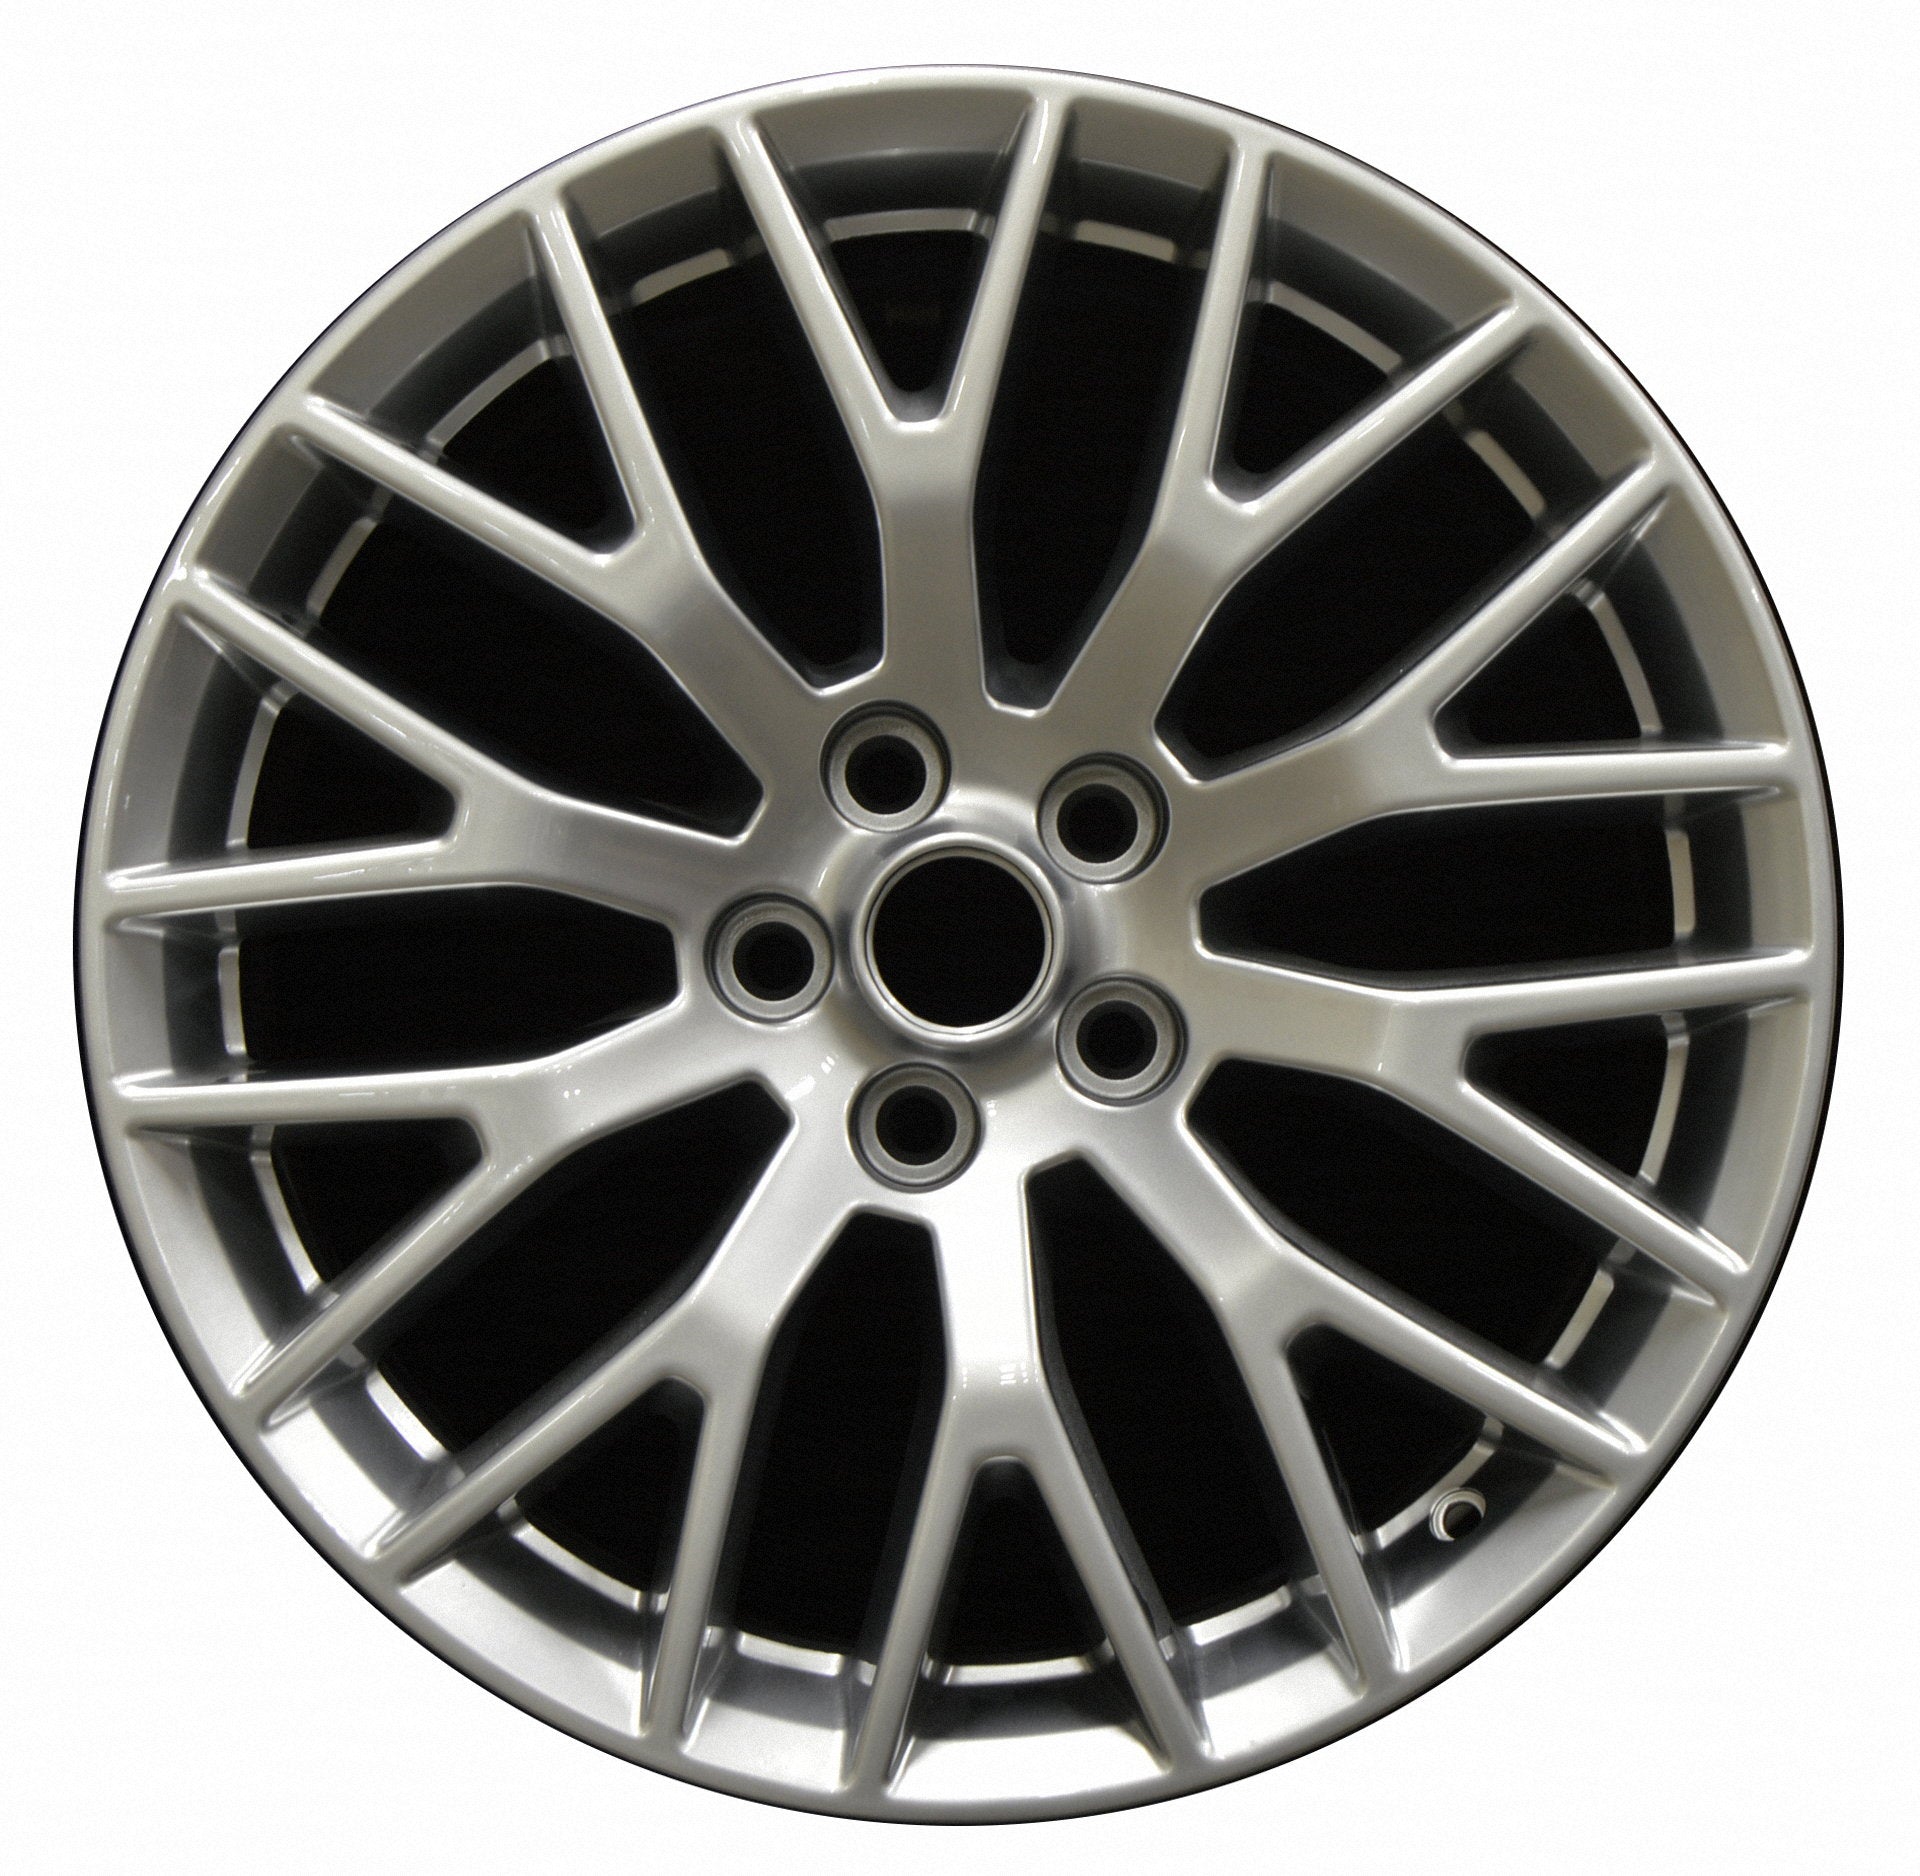 Ford Mustang  2015, 2016, 2017, 2018 Factory OEM Car Wheel Size 19x9 Alloy WAO.10036FT.LS100V2.FFBRT